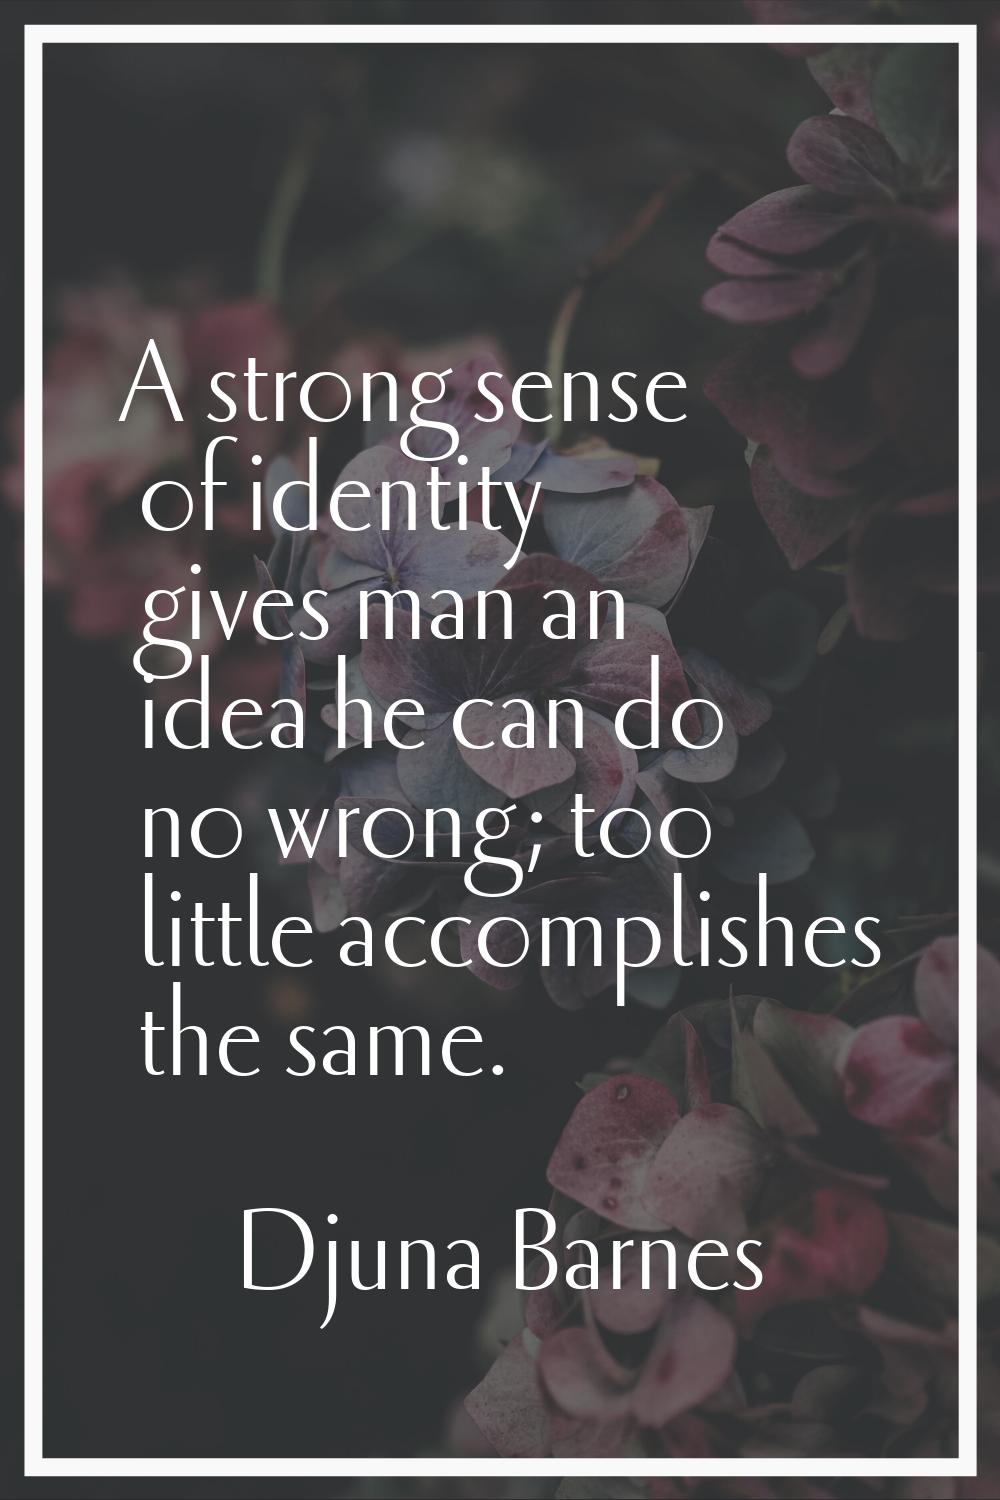 A strong sense of identity gives man an idea he can do no wrong; too little accomplishes the same.